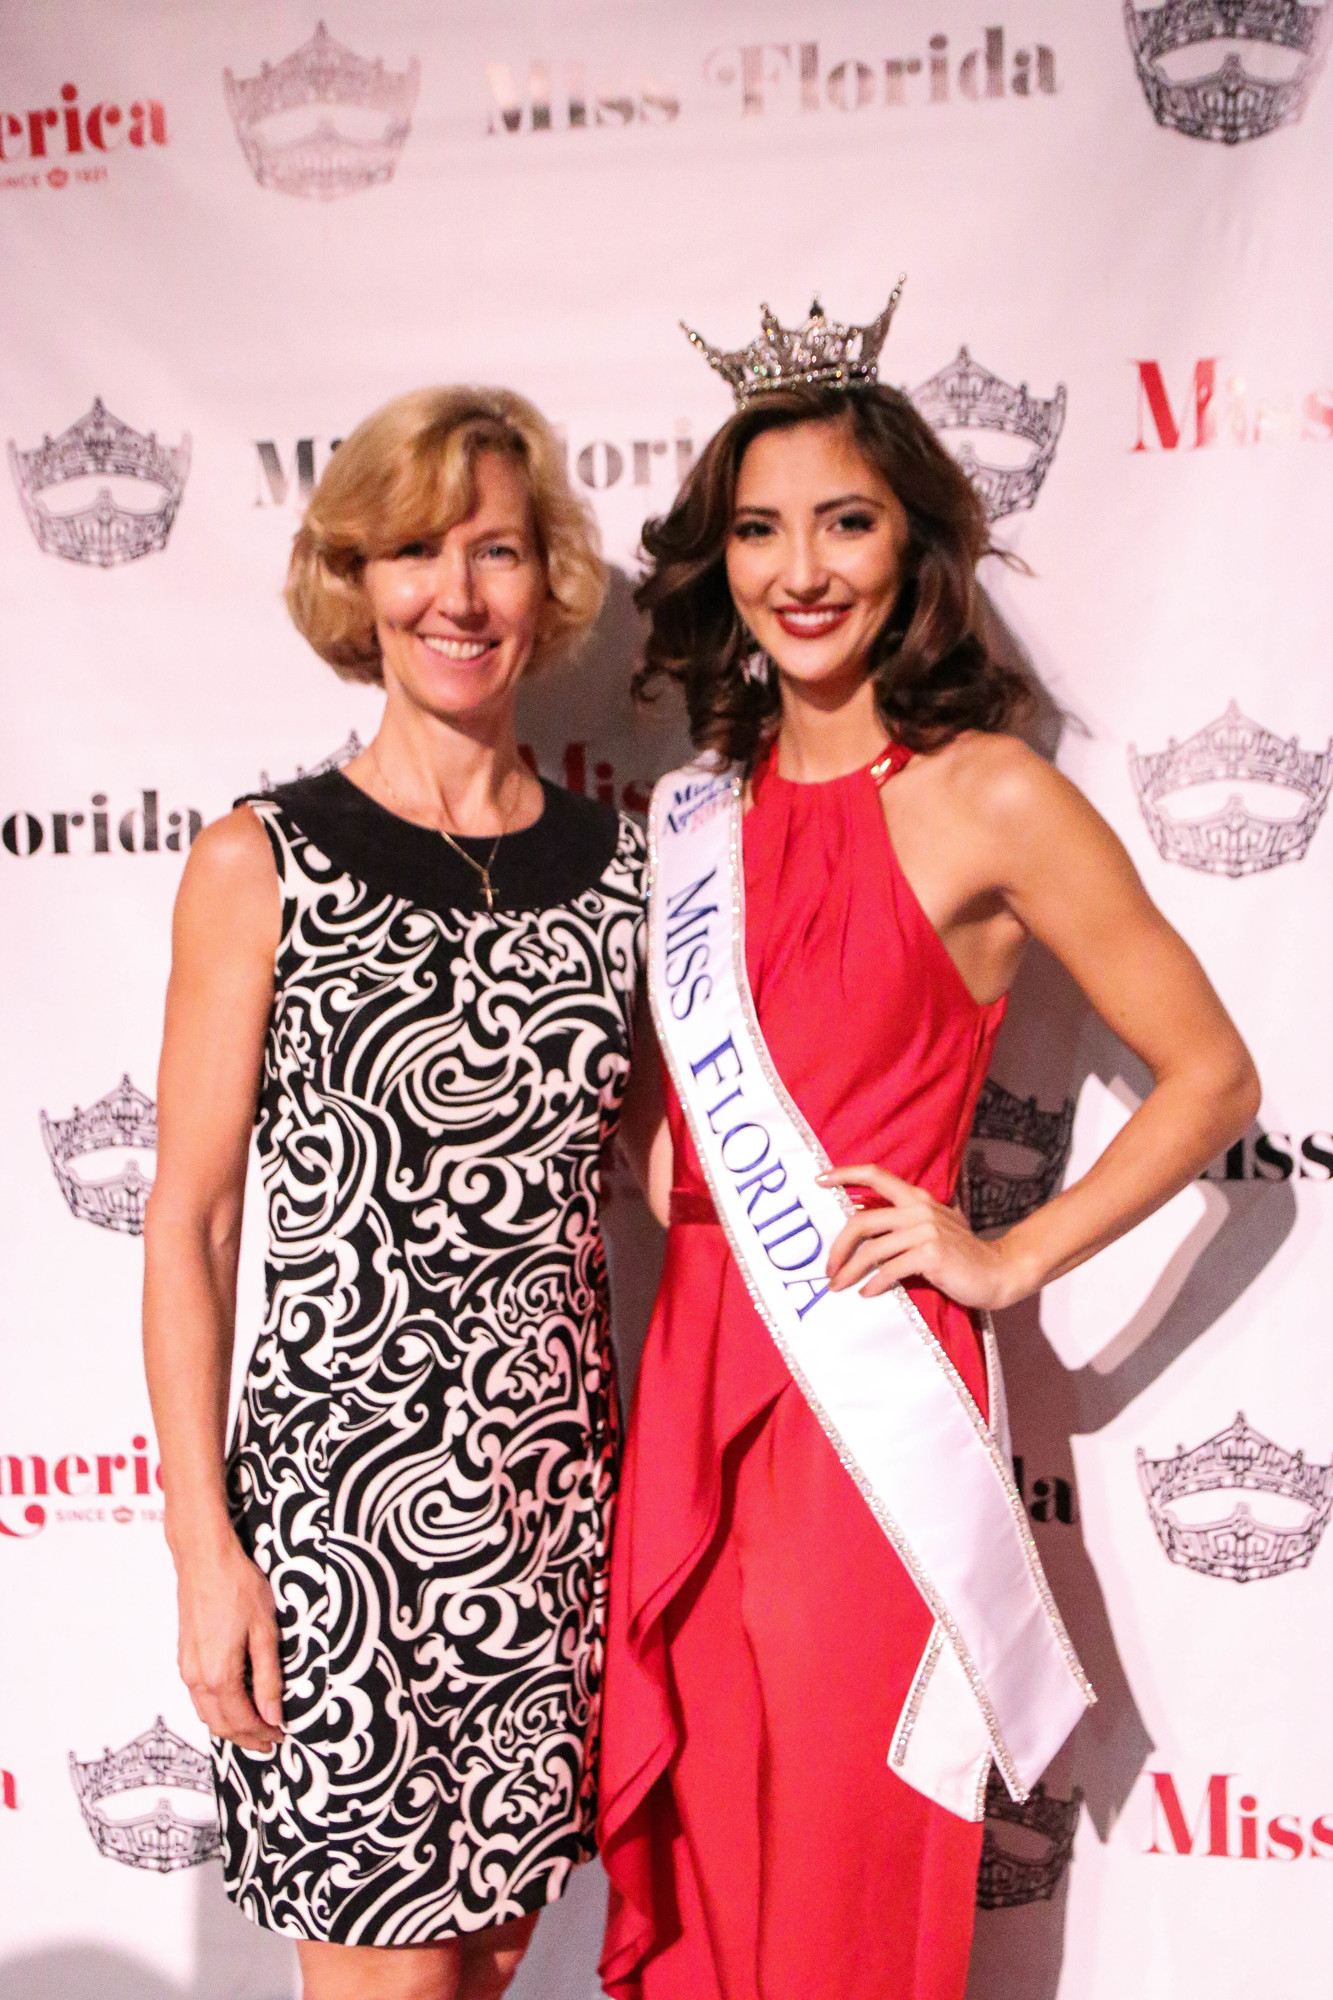 Miss Florida, Sara Zeng, poses with her mother Jennifer Stockett, who was a former second runner up for Miss New Jersey. Photo by Paige WilsonPhoto by Paige Wilson